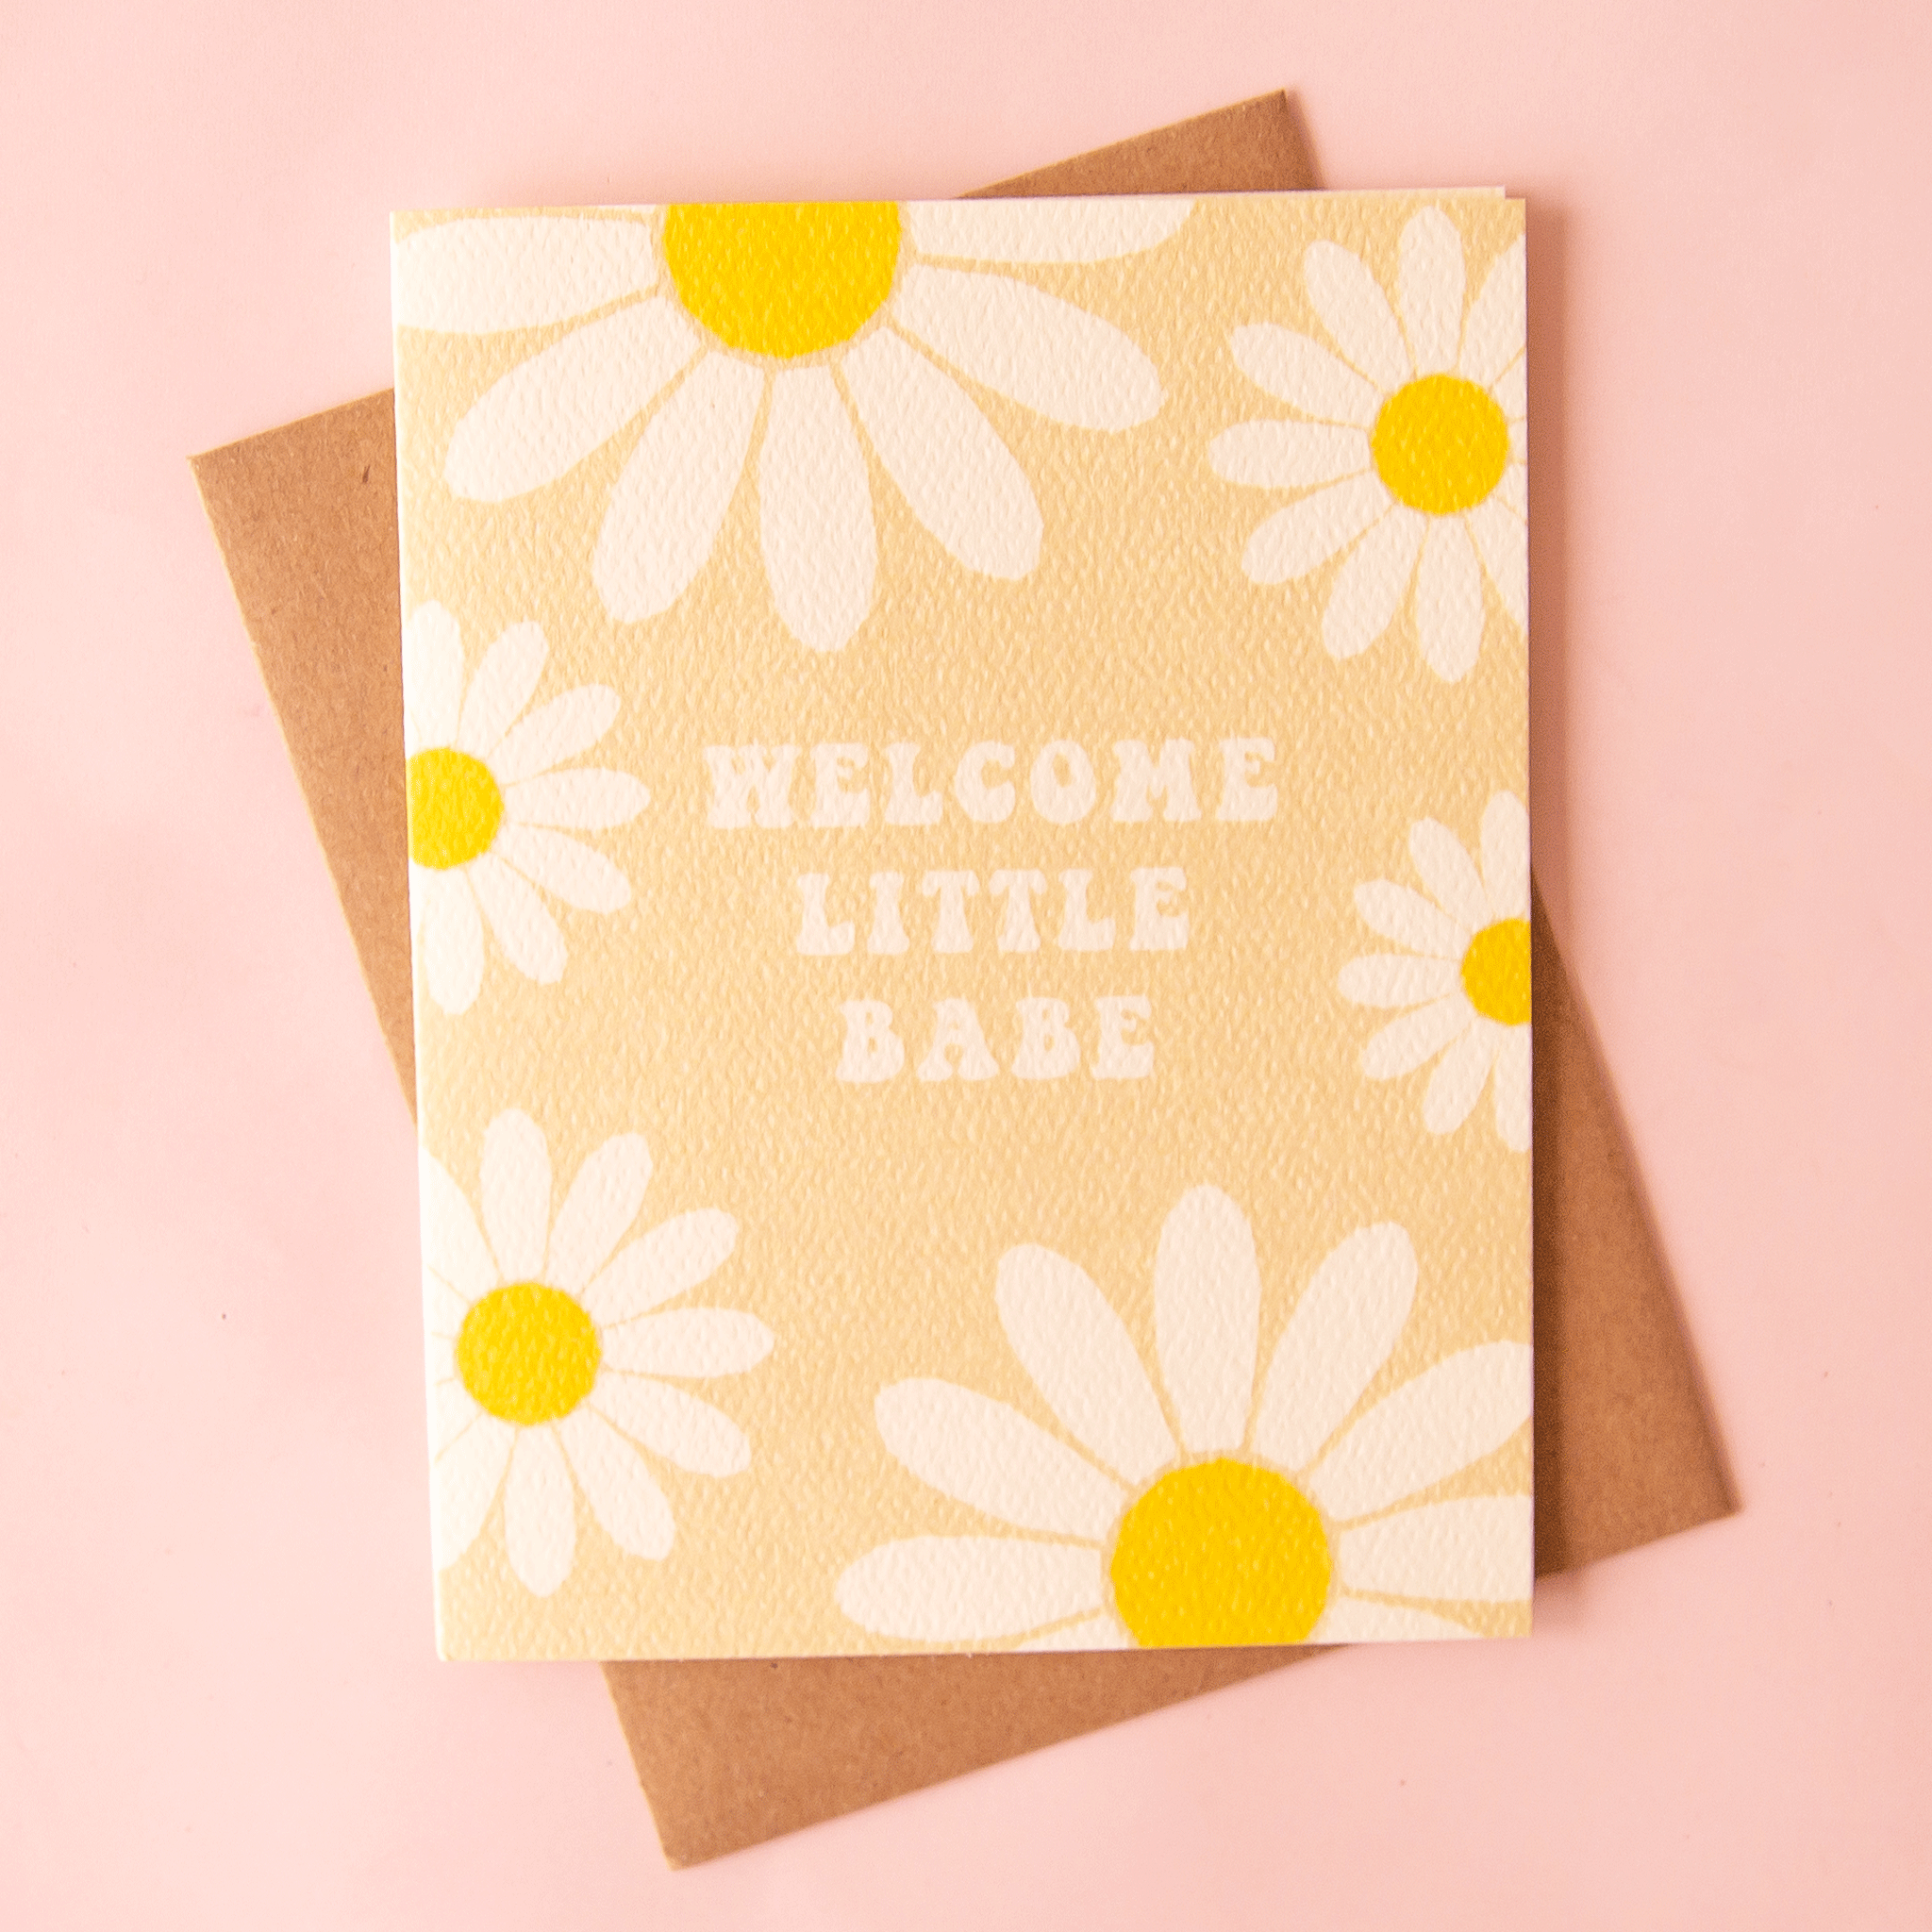 A tan card with white and yellow daisies all over the edges along with groovy text in the center that reads, "Welcome Little Babe" along with a Kraft brown envelope.